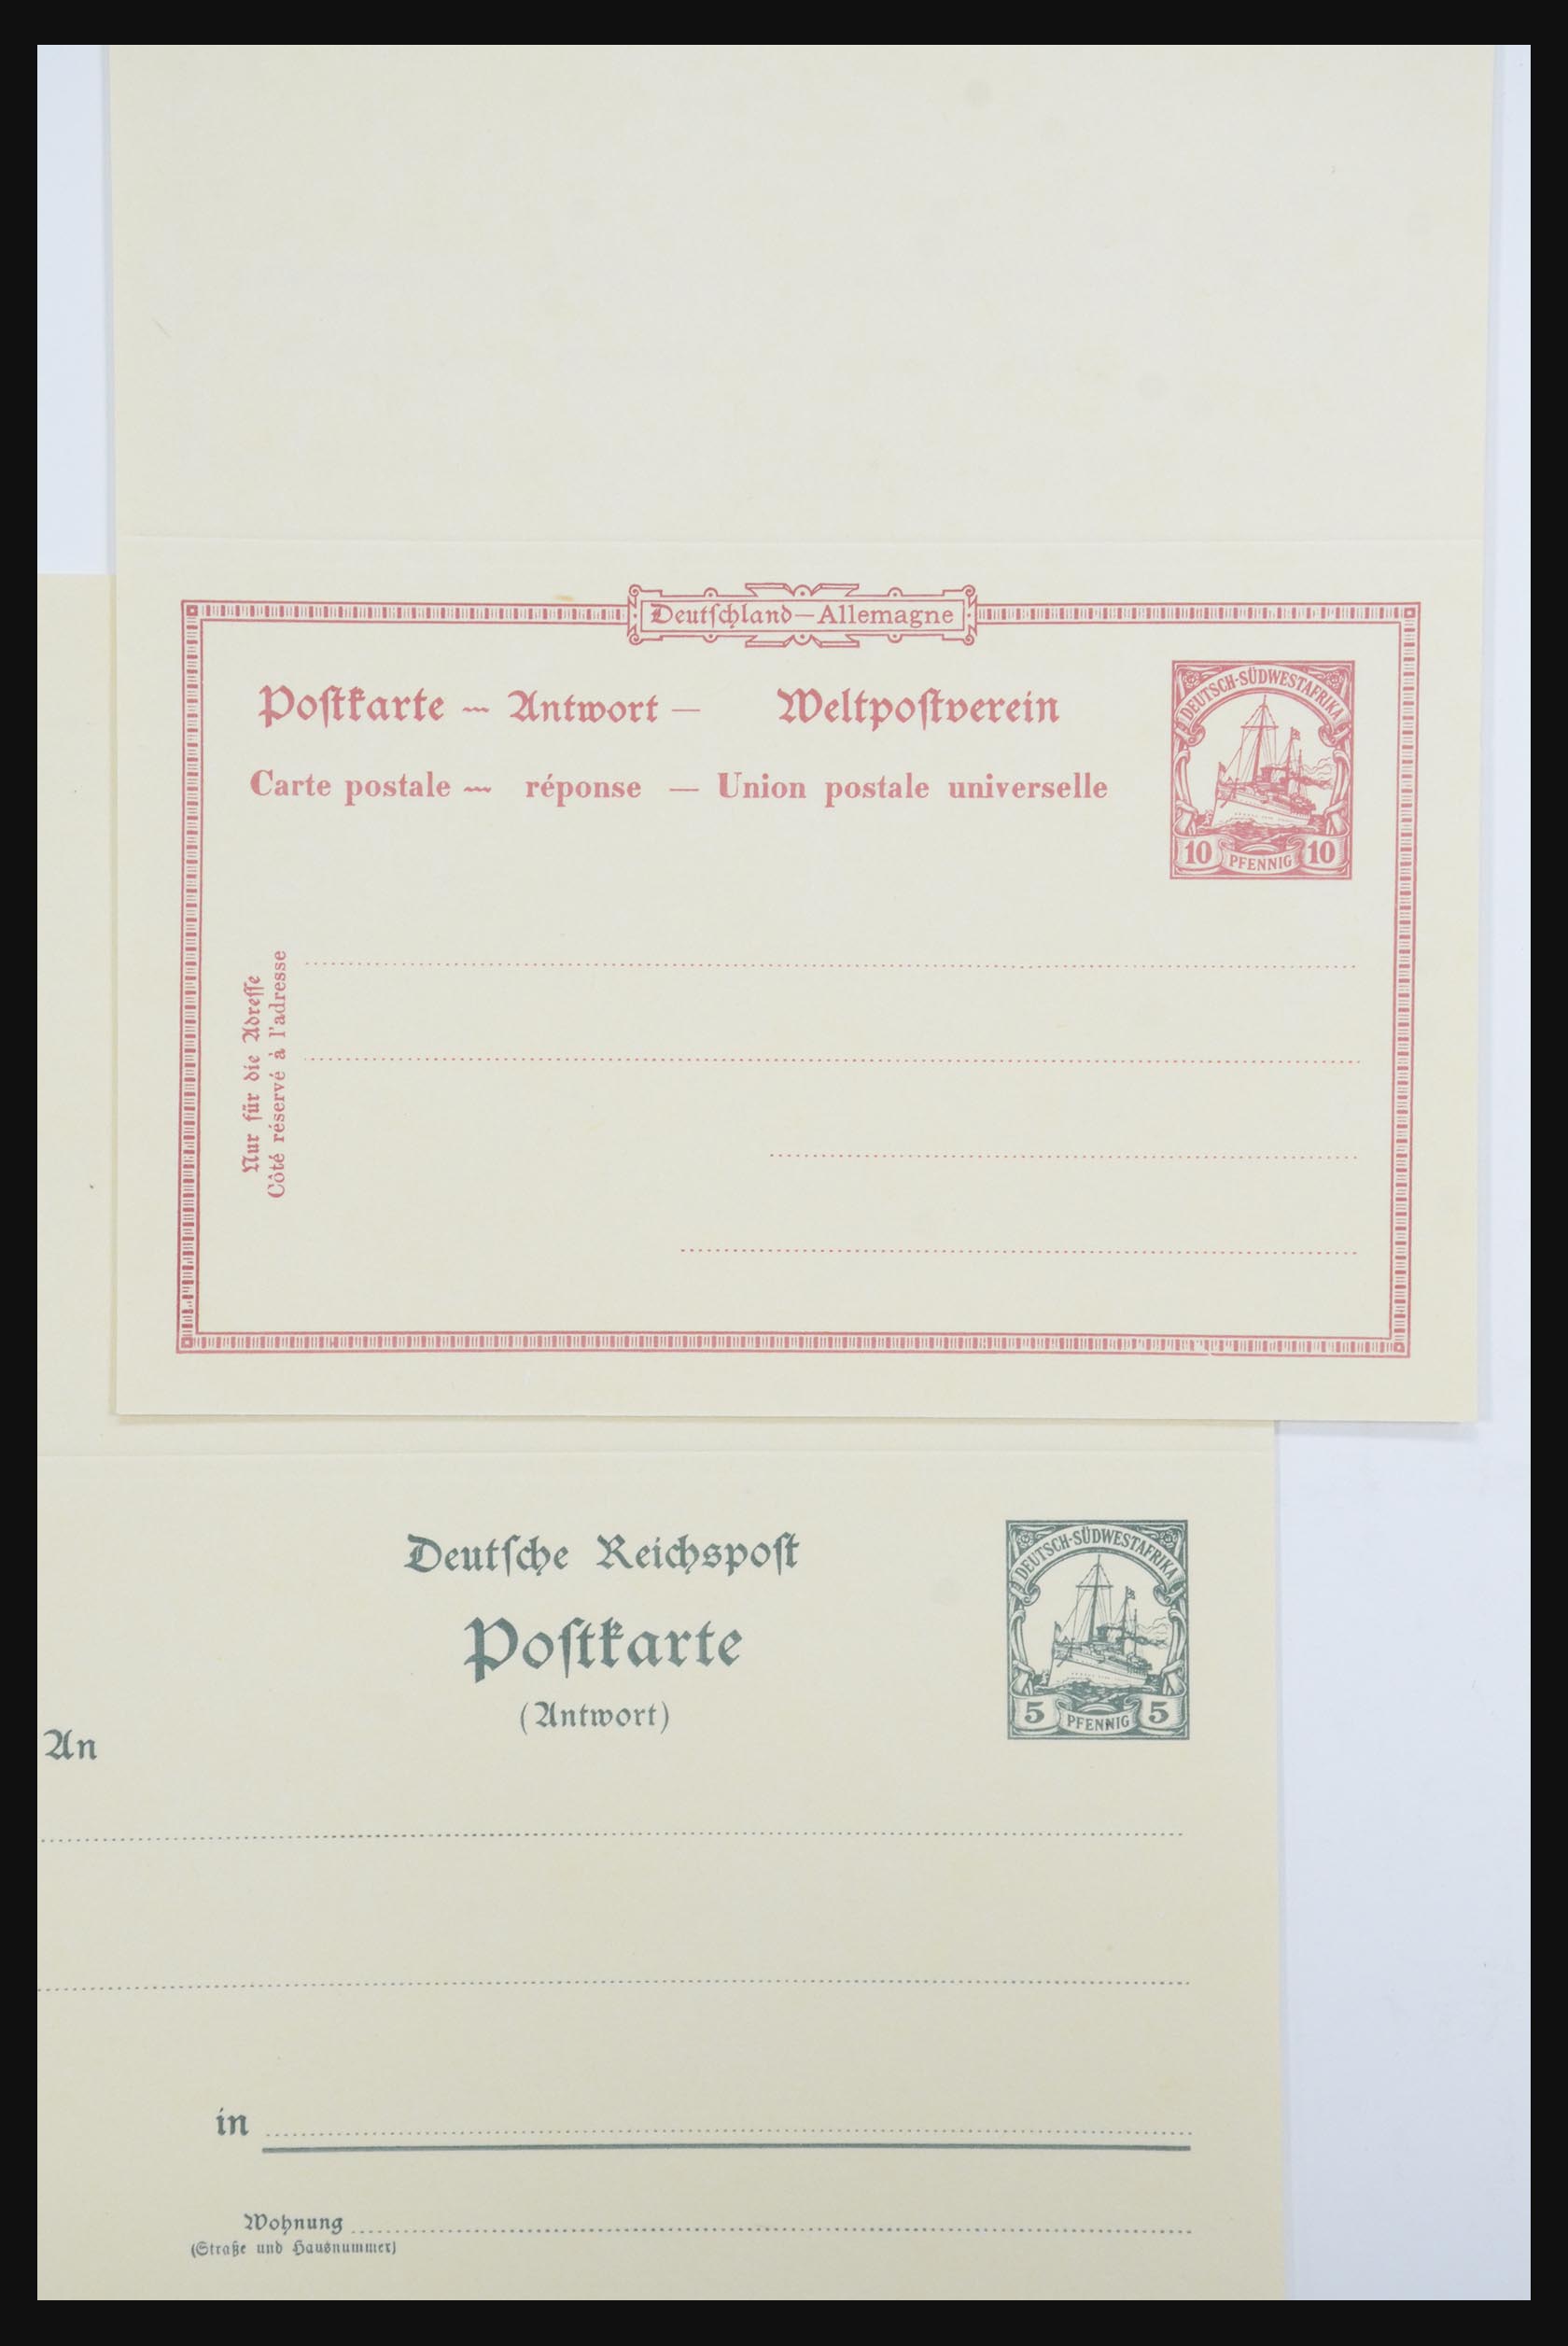 31608 604 - 31608 Germany, territories, States, occupations 1850-1965.